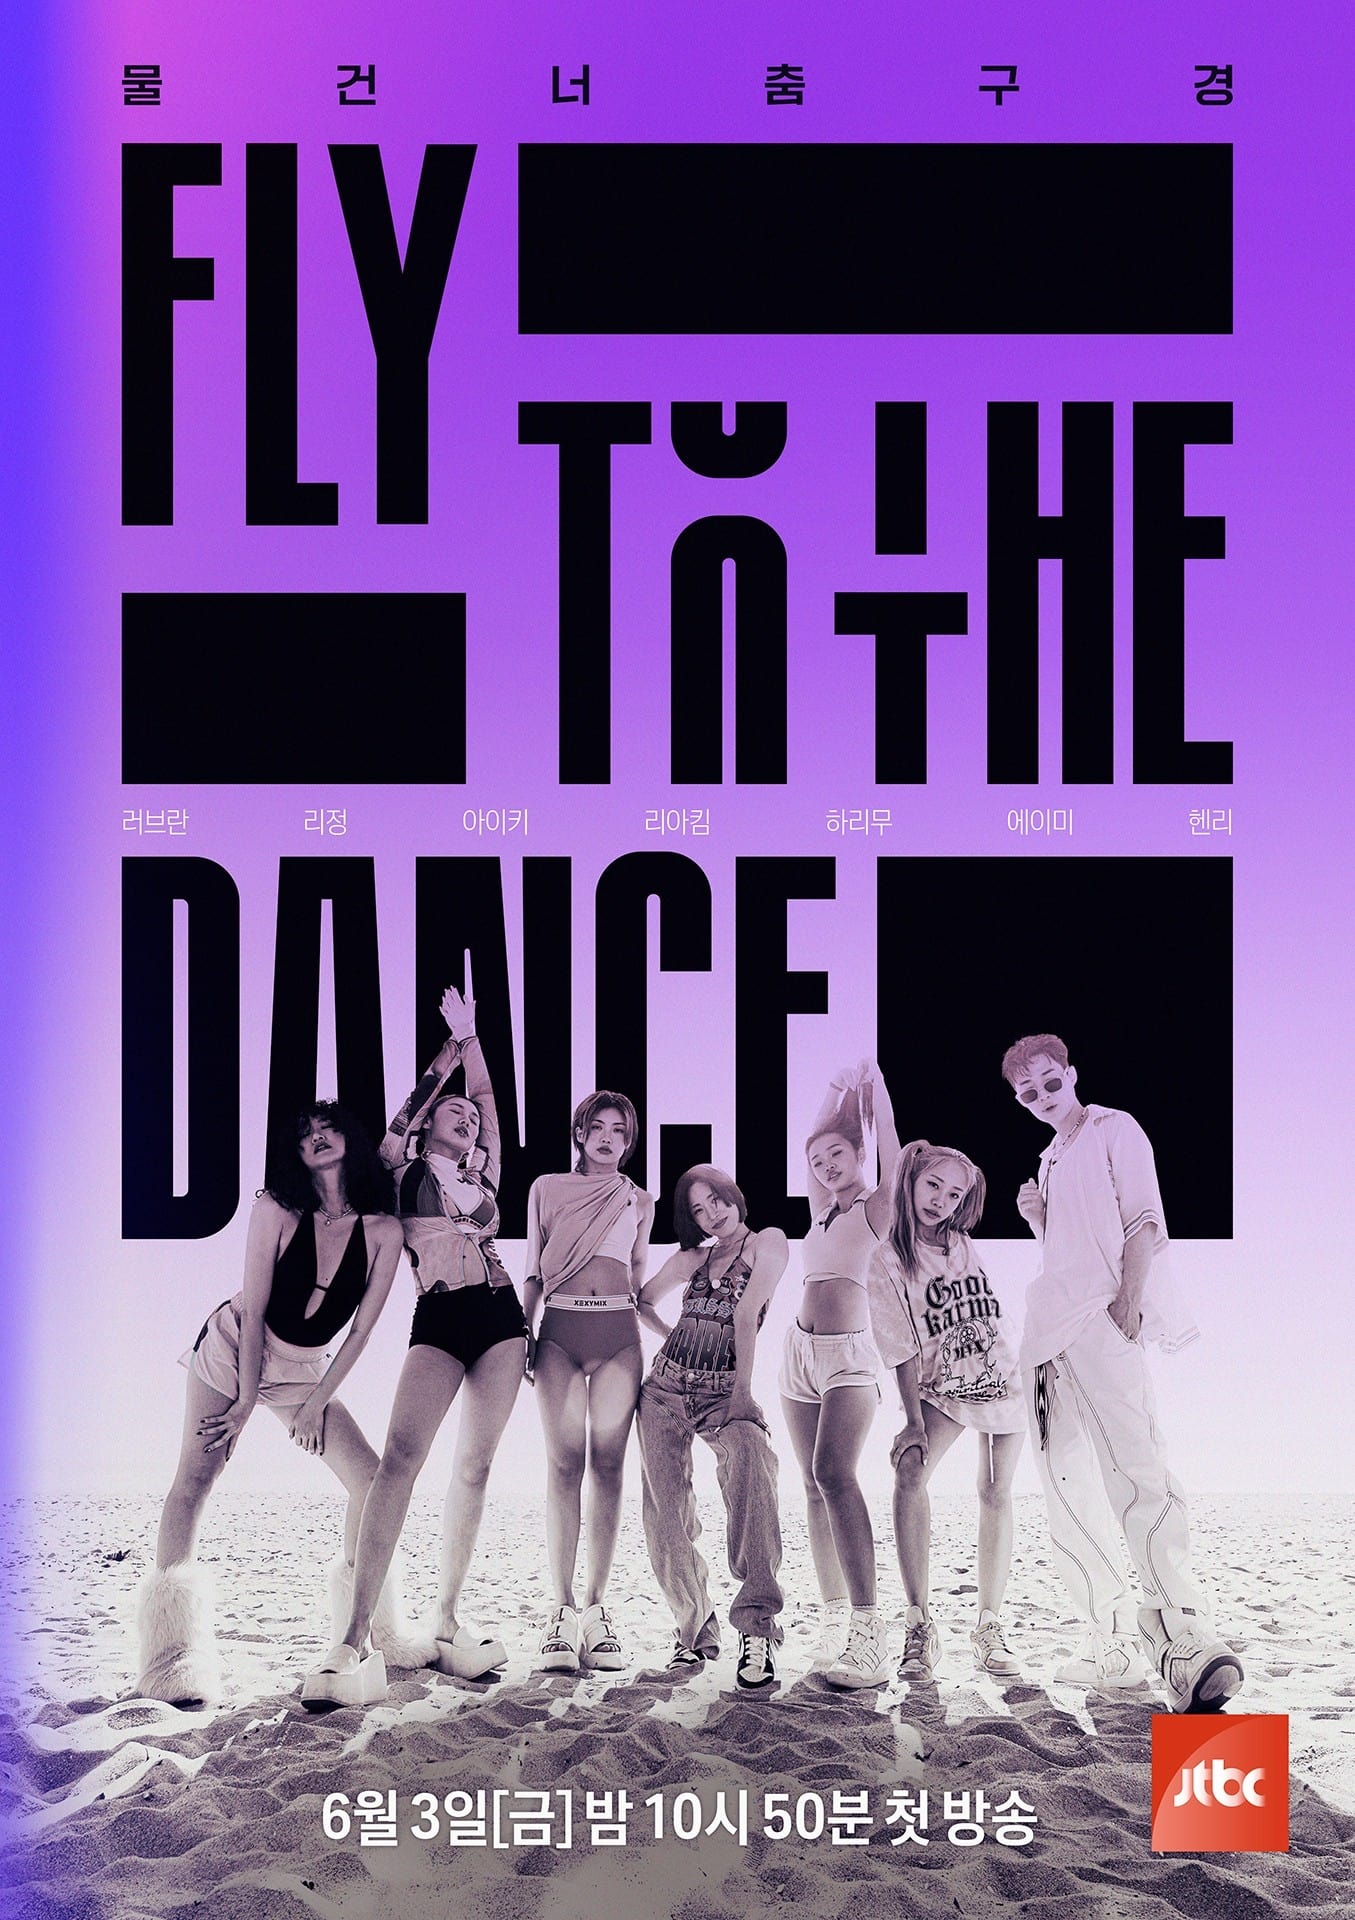 TV ratings for Fly To The Dance (플라이 투 더 댄스) in Países Bajos. JTBC TV series